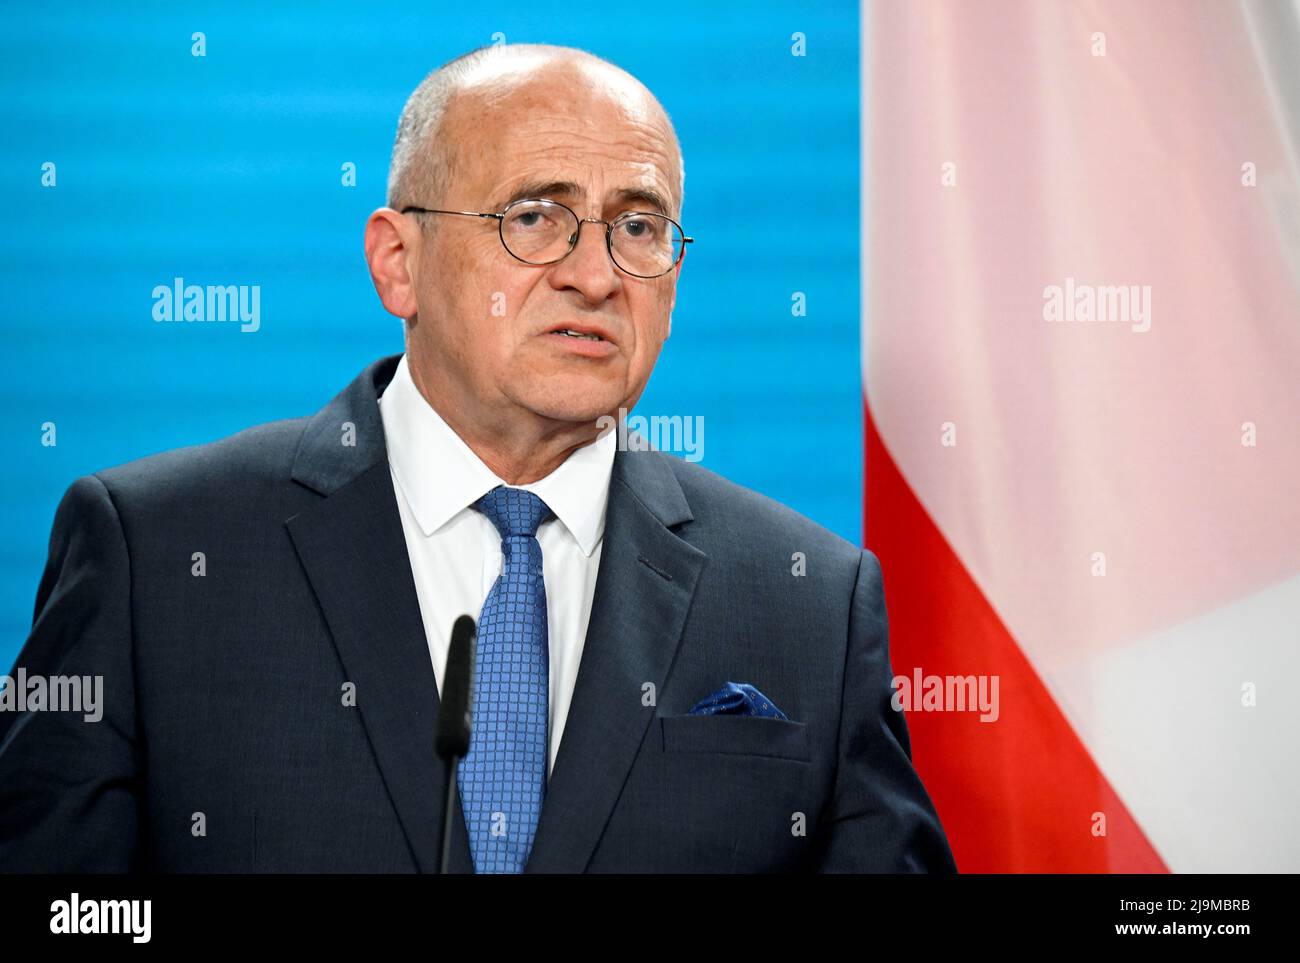 Polish Foreign Minister Zbigniew Rau speaks during a joint news conference with German Foreign Minister Annalena Baerbock (not seen) in Berlin, Germany May 24, 2022. Tobias Schwarz/Pool via REUTERS Stock Photo